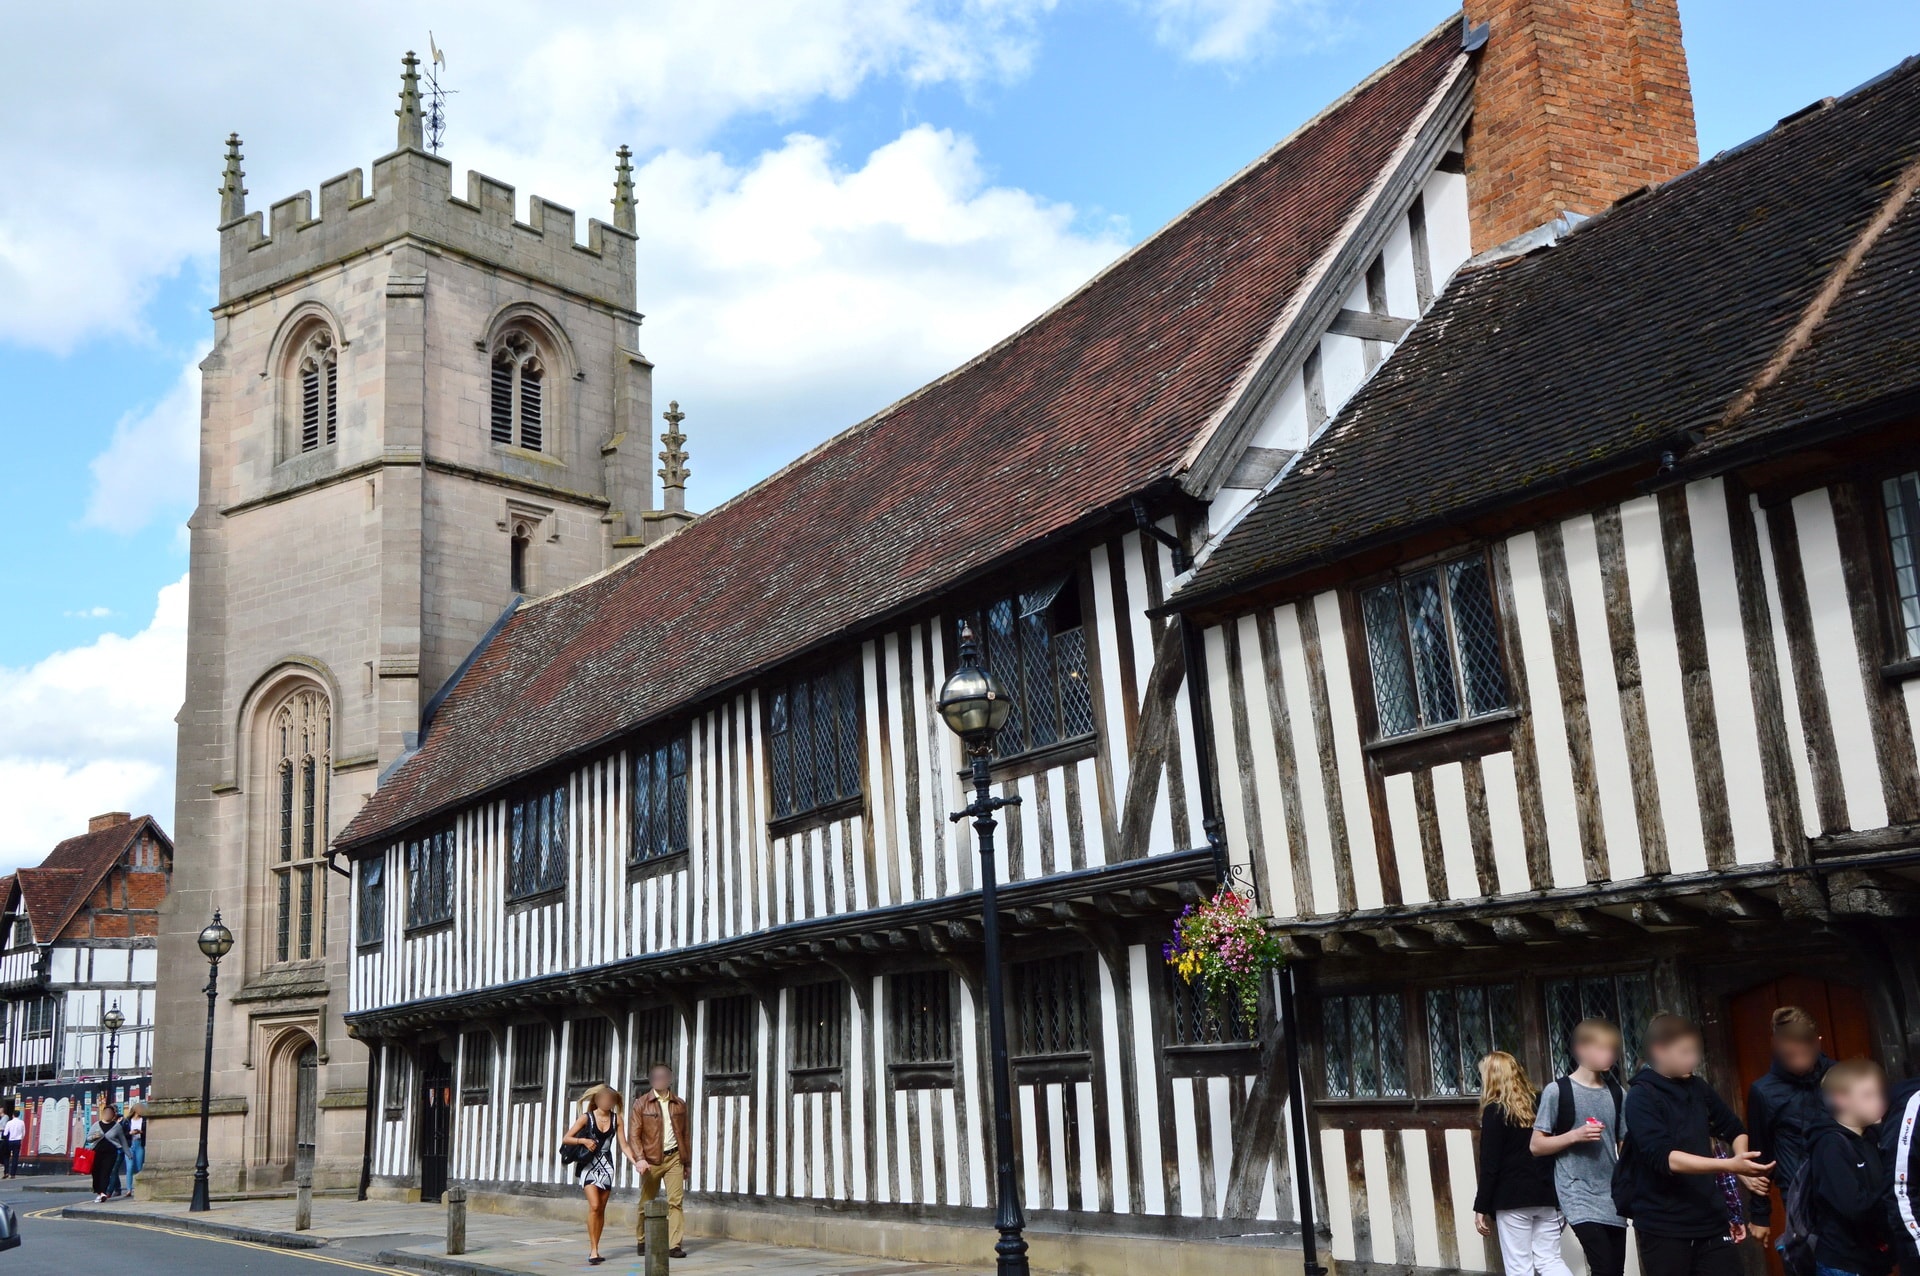 Shakespeare's Schoolroom & Guildhall – Shakespeare attended this grammar school in Church Street